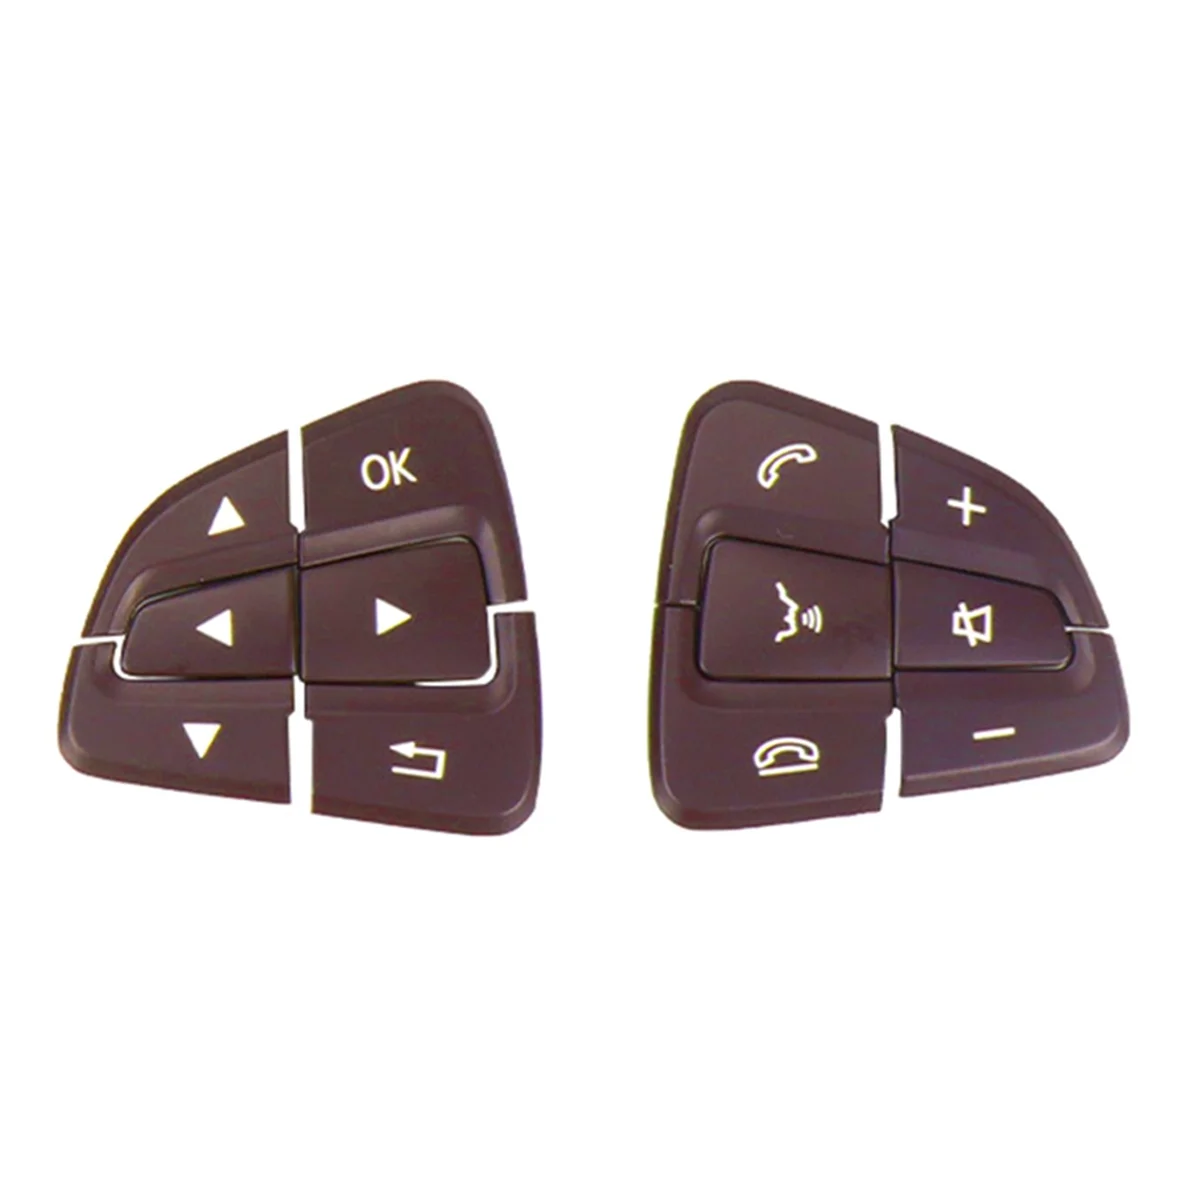 

Multi-Function Steering Wheel Switch Buttons for Mercedes Benz AB GLA GLS GLE W176 W246 W166 0999050600 0999050700 Brown